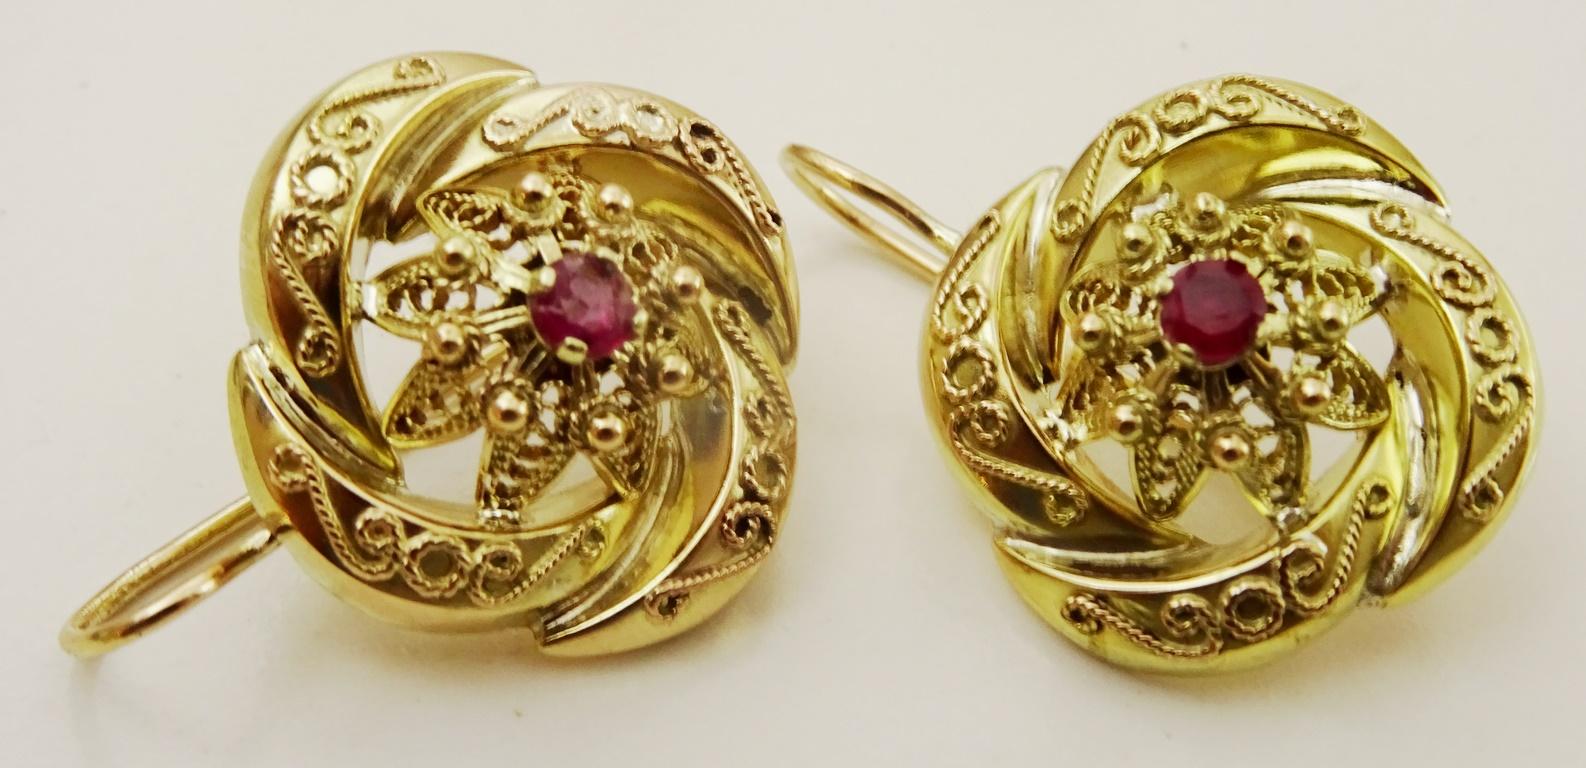 A pair of vintage handmade in acid tested 14 karat Gold Earrings set with a 2.5 mm Round Ruby.
The design and workmanship on these earrings is top caliber.
just over one inch long - 27 mm
3/4 of an inch wide - 2 cm 